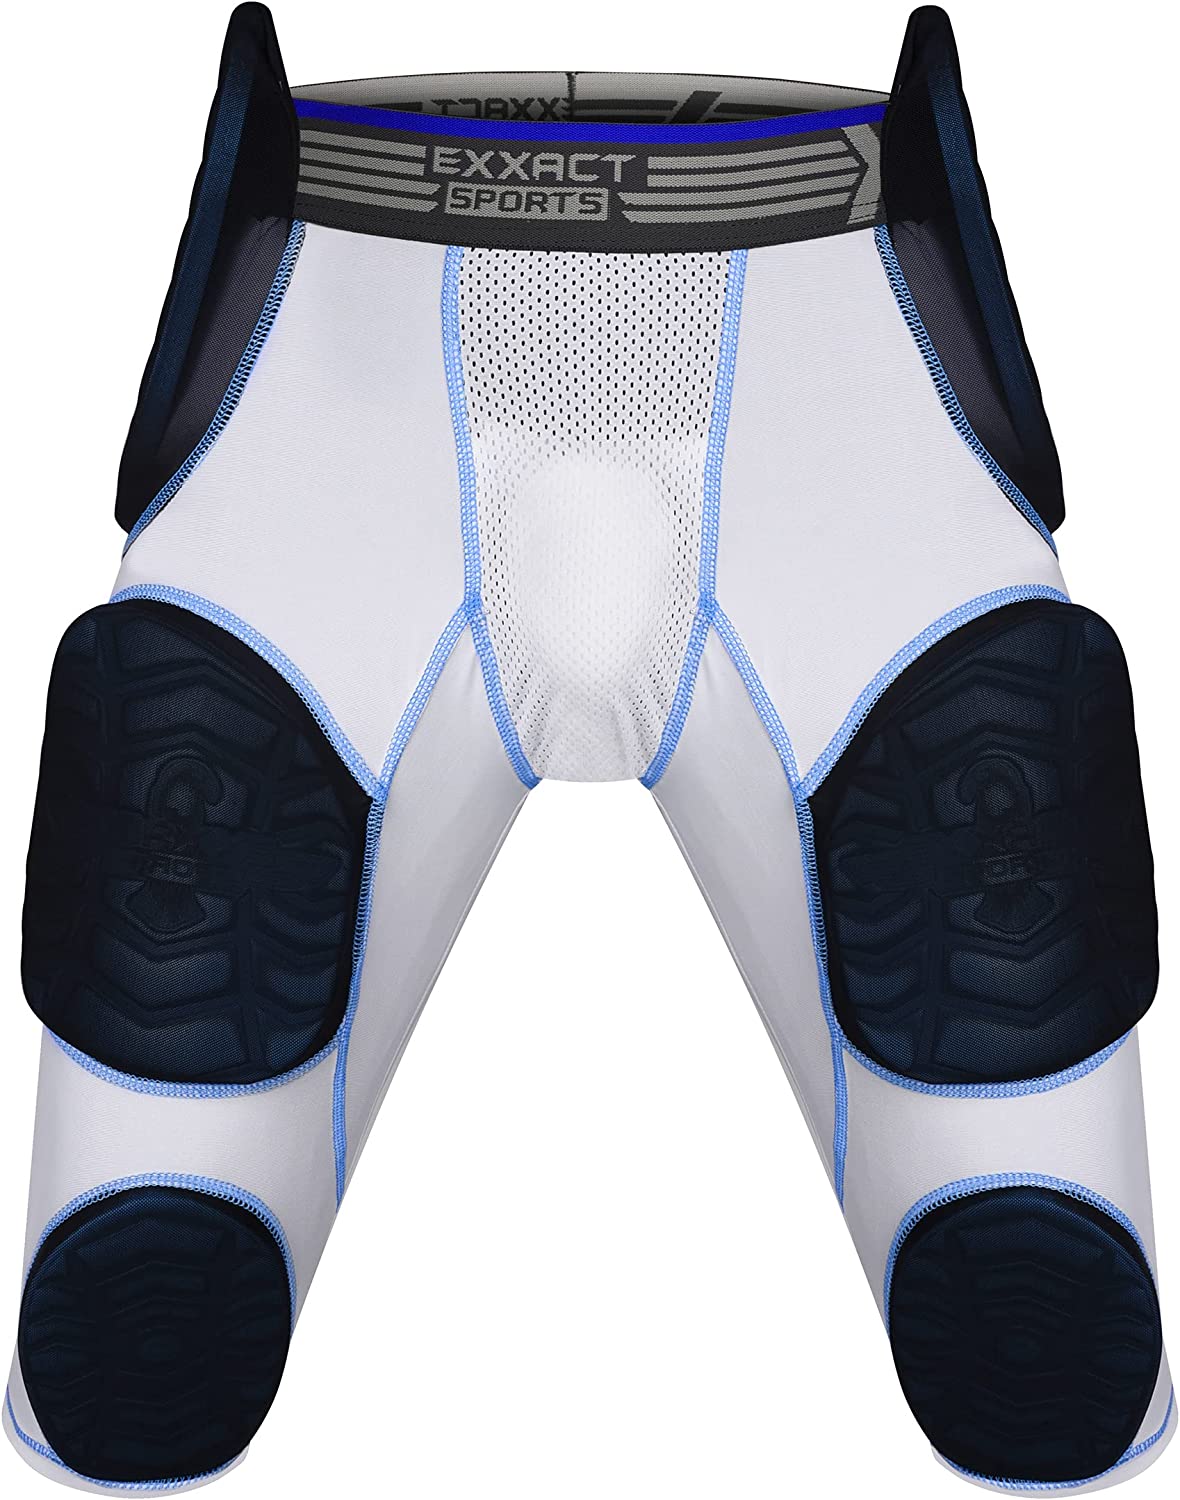 Exxact Sports Adult ‘Combat’ 7 Pad Integrated Football Girdle Men’s Padded Compression Tights for Football 